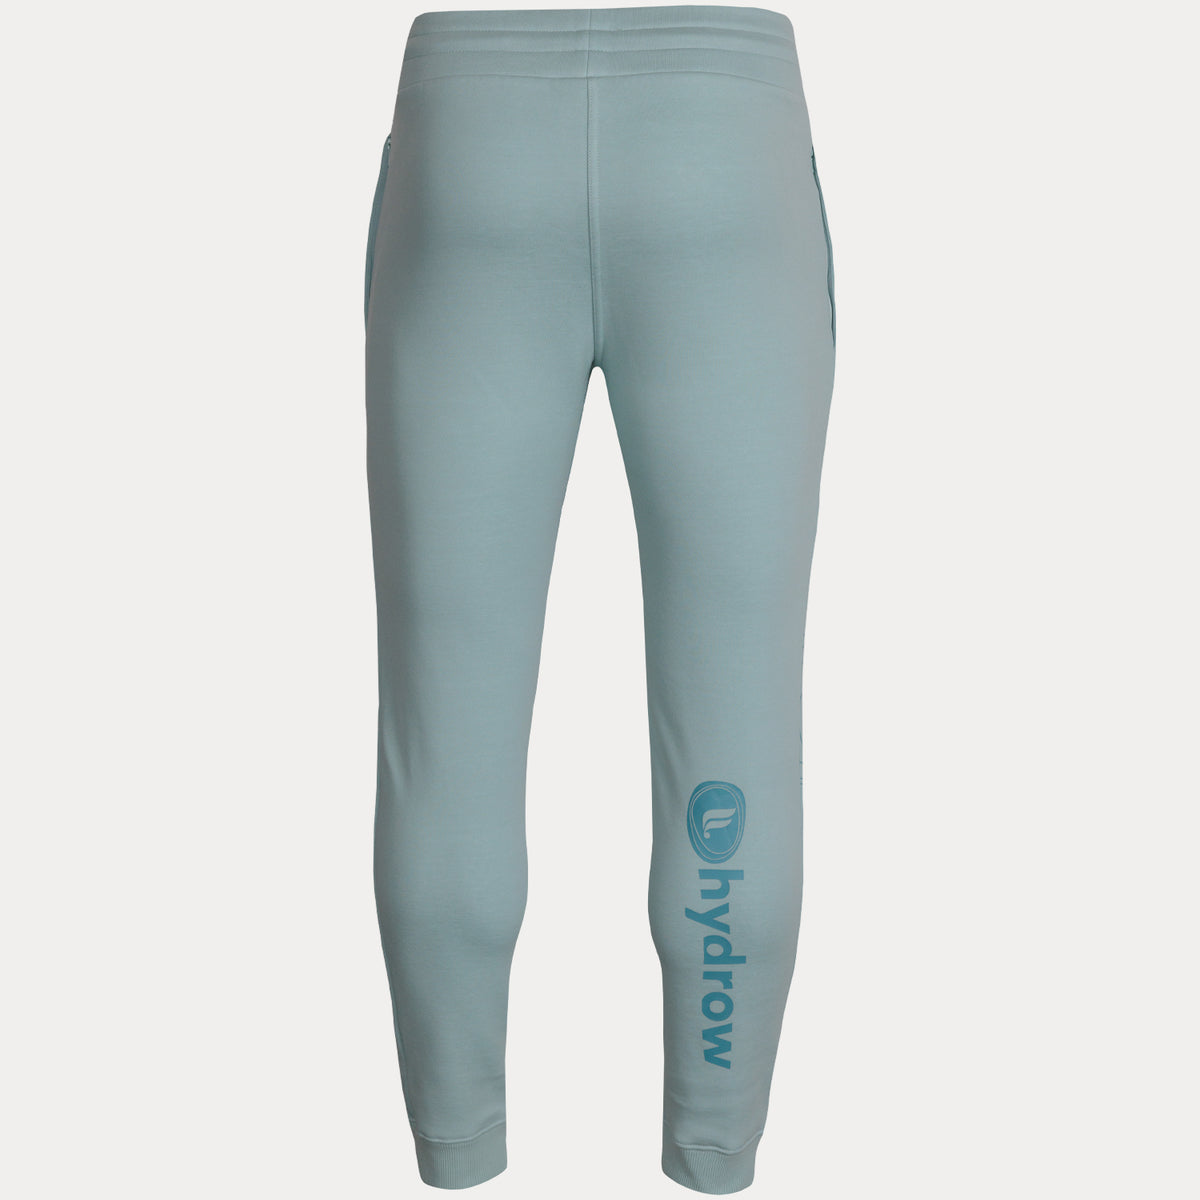 rear view of light blue jogger with hydrow logo on rear right calf